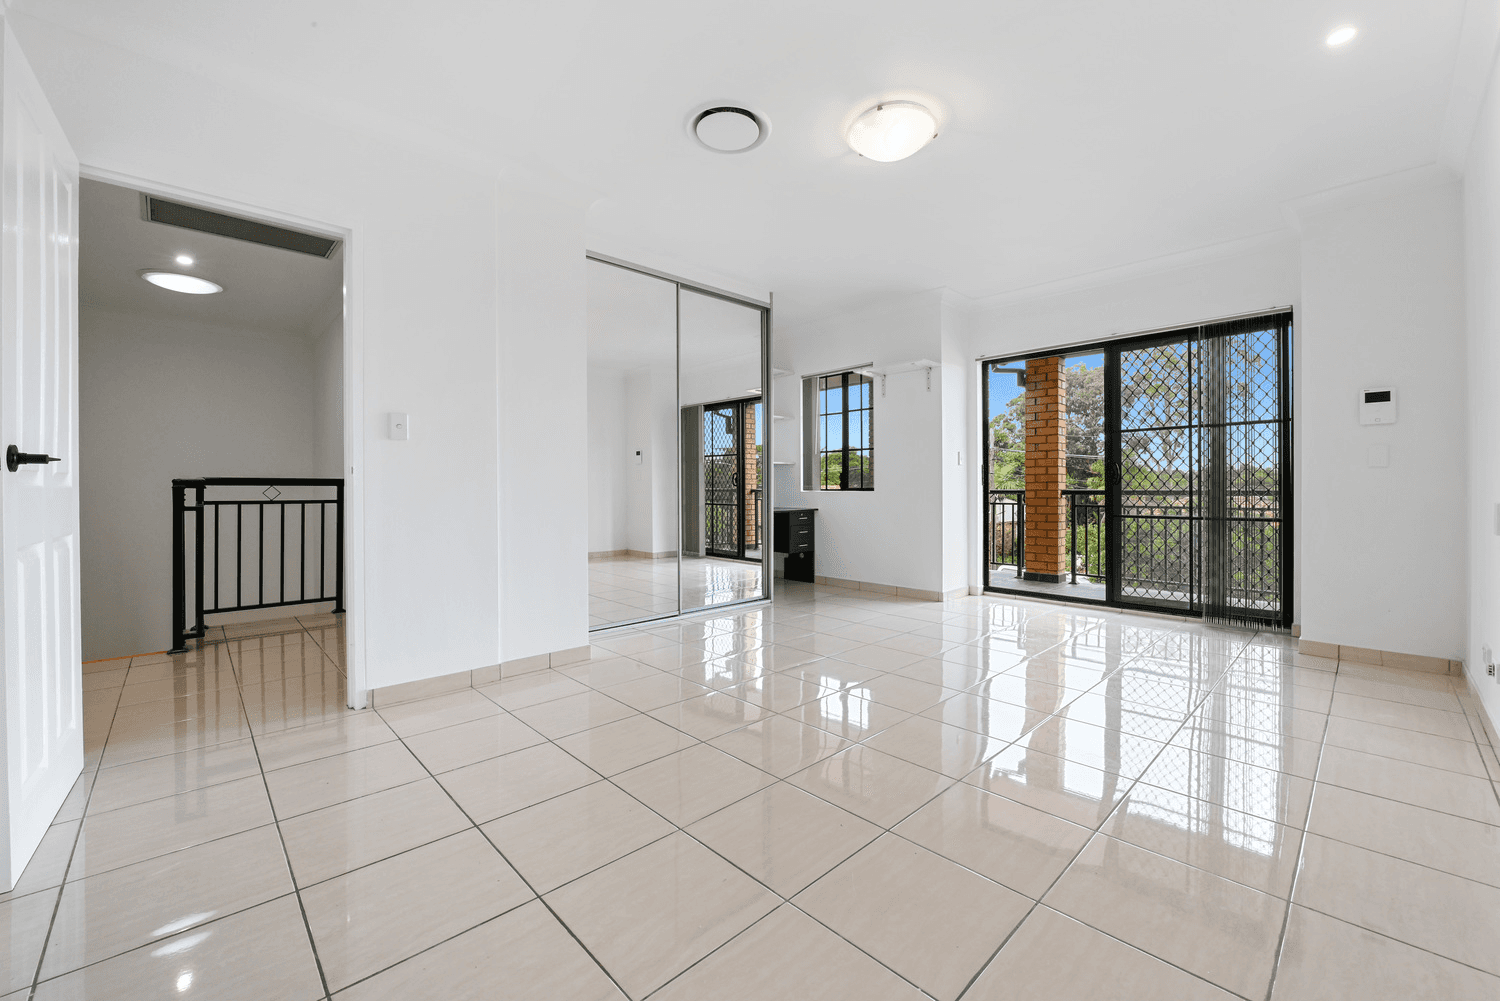 10a Buckley Avenue, Revesby, NSW 2212